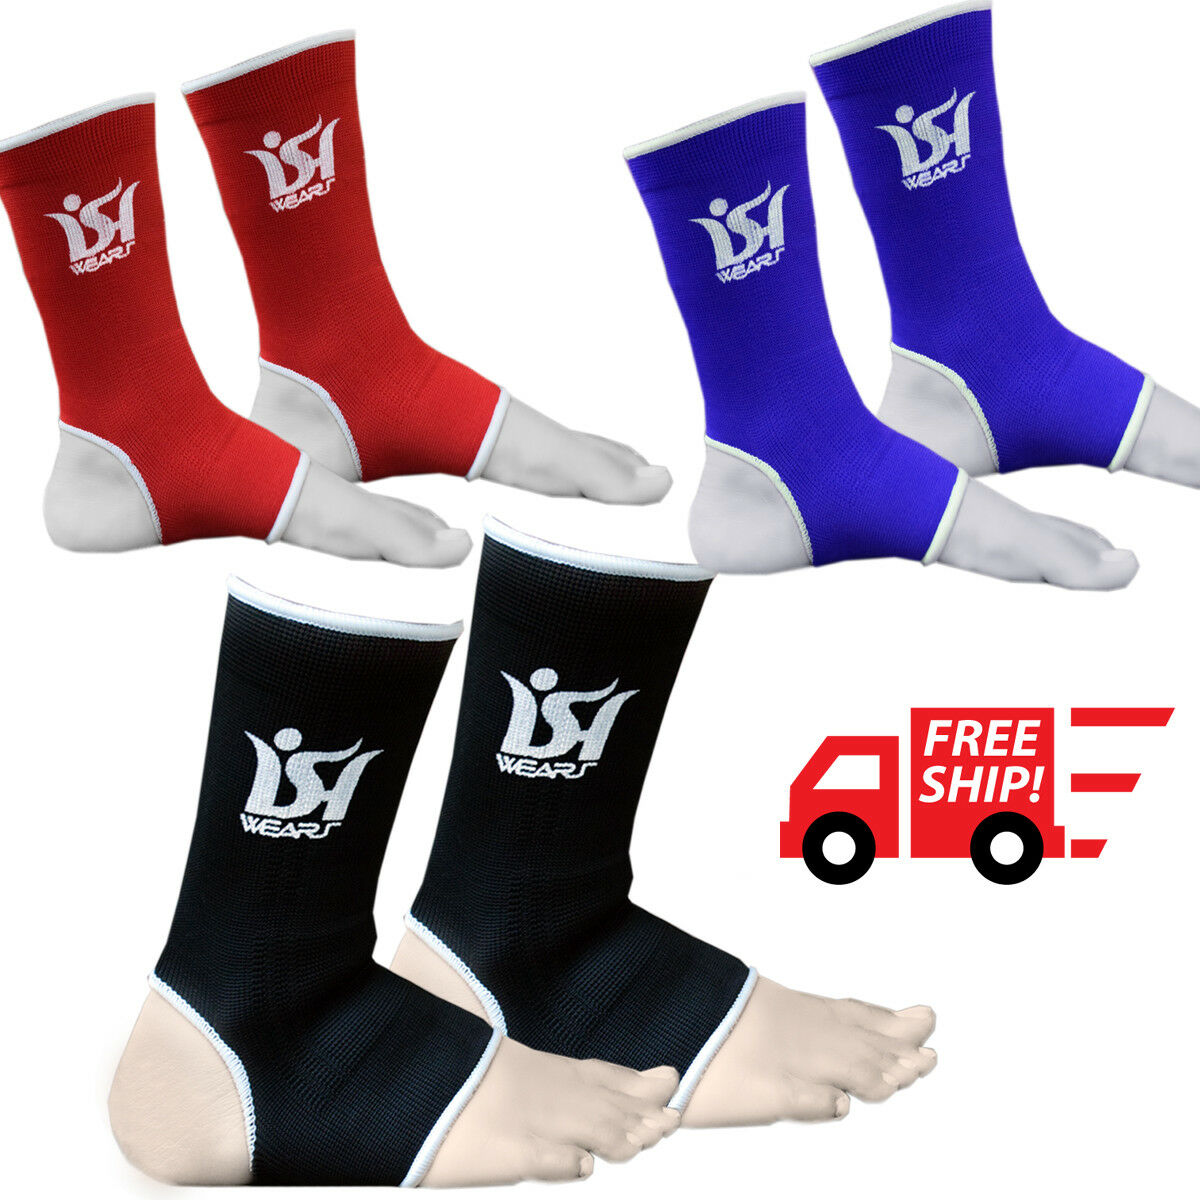 Ankle Foot Support Mma Boxing Brace Guard Pads Kick Muay Thai Ufc Gym Anklet